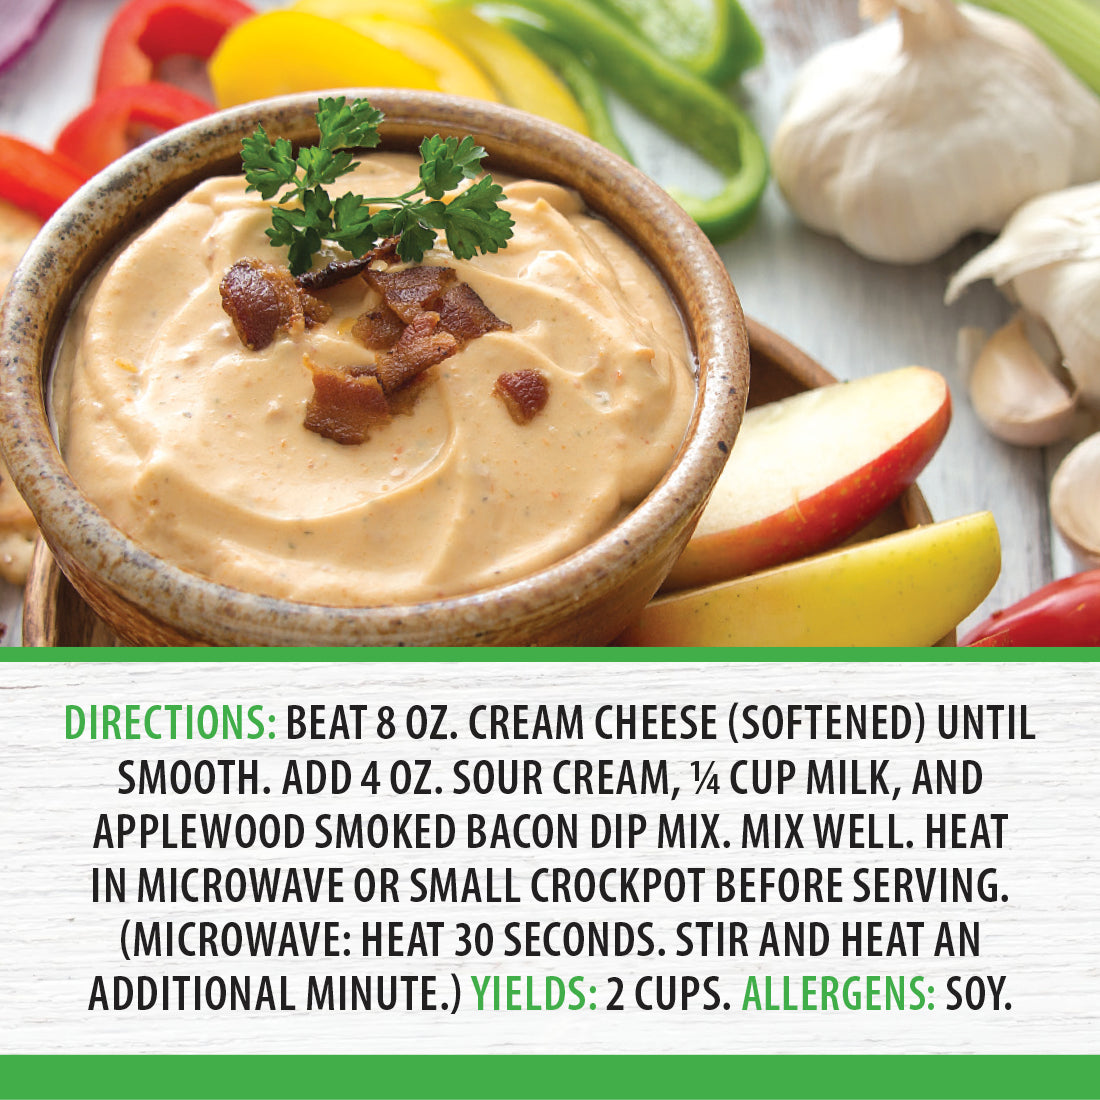 Applewood Smoked Bacon Dip served with crackers and vegetables. 